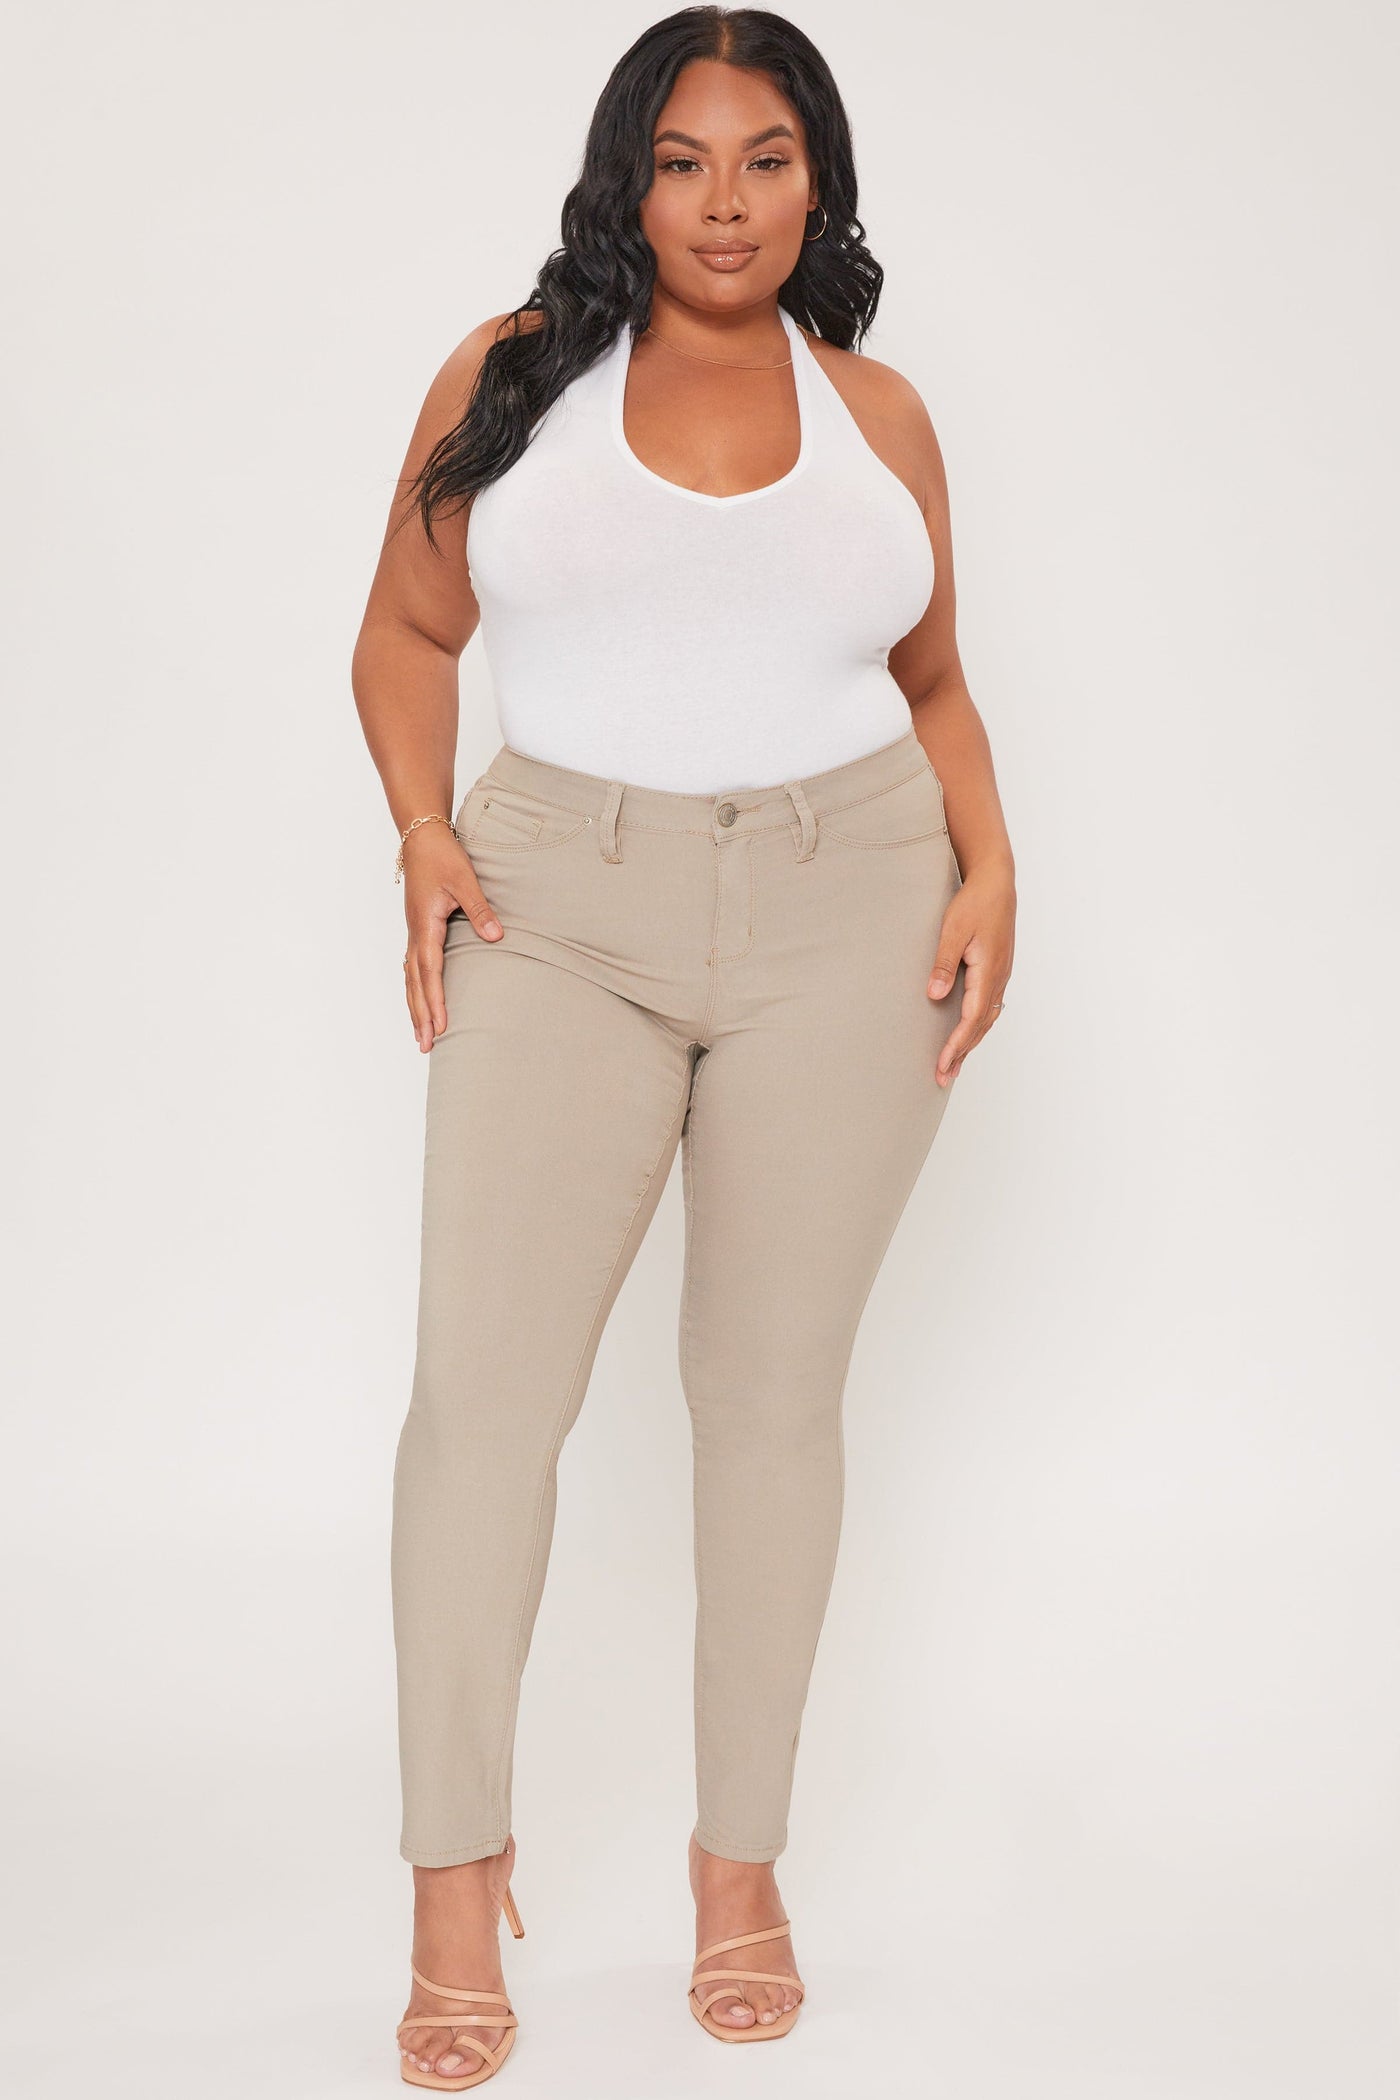 Plus Size Women's Hyperstretch Forever Color Flare Pants from YMI